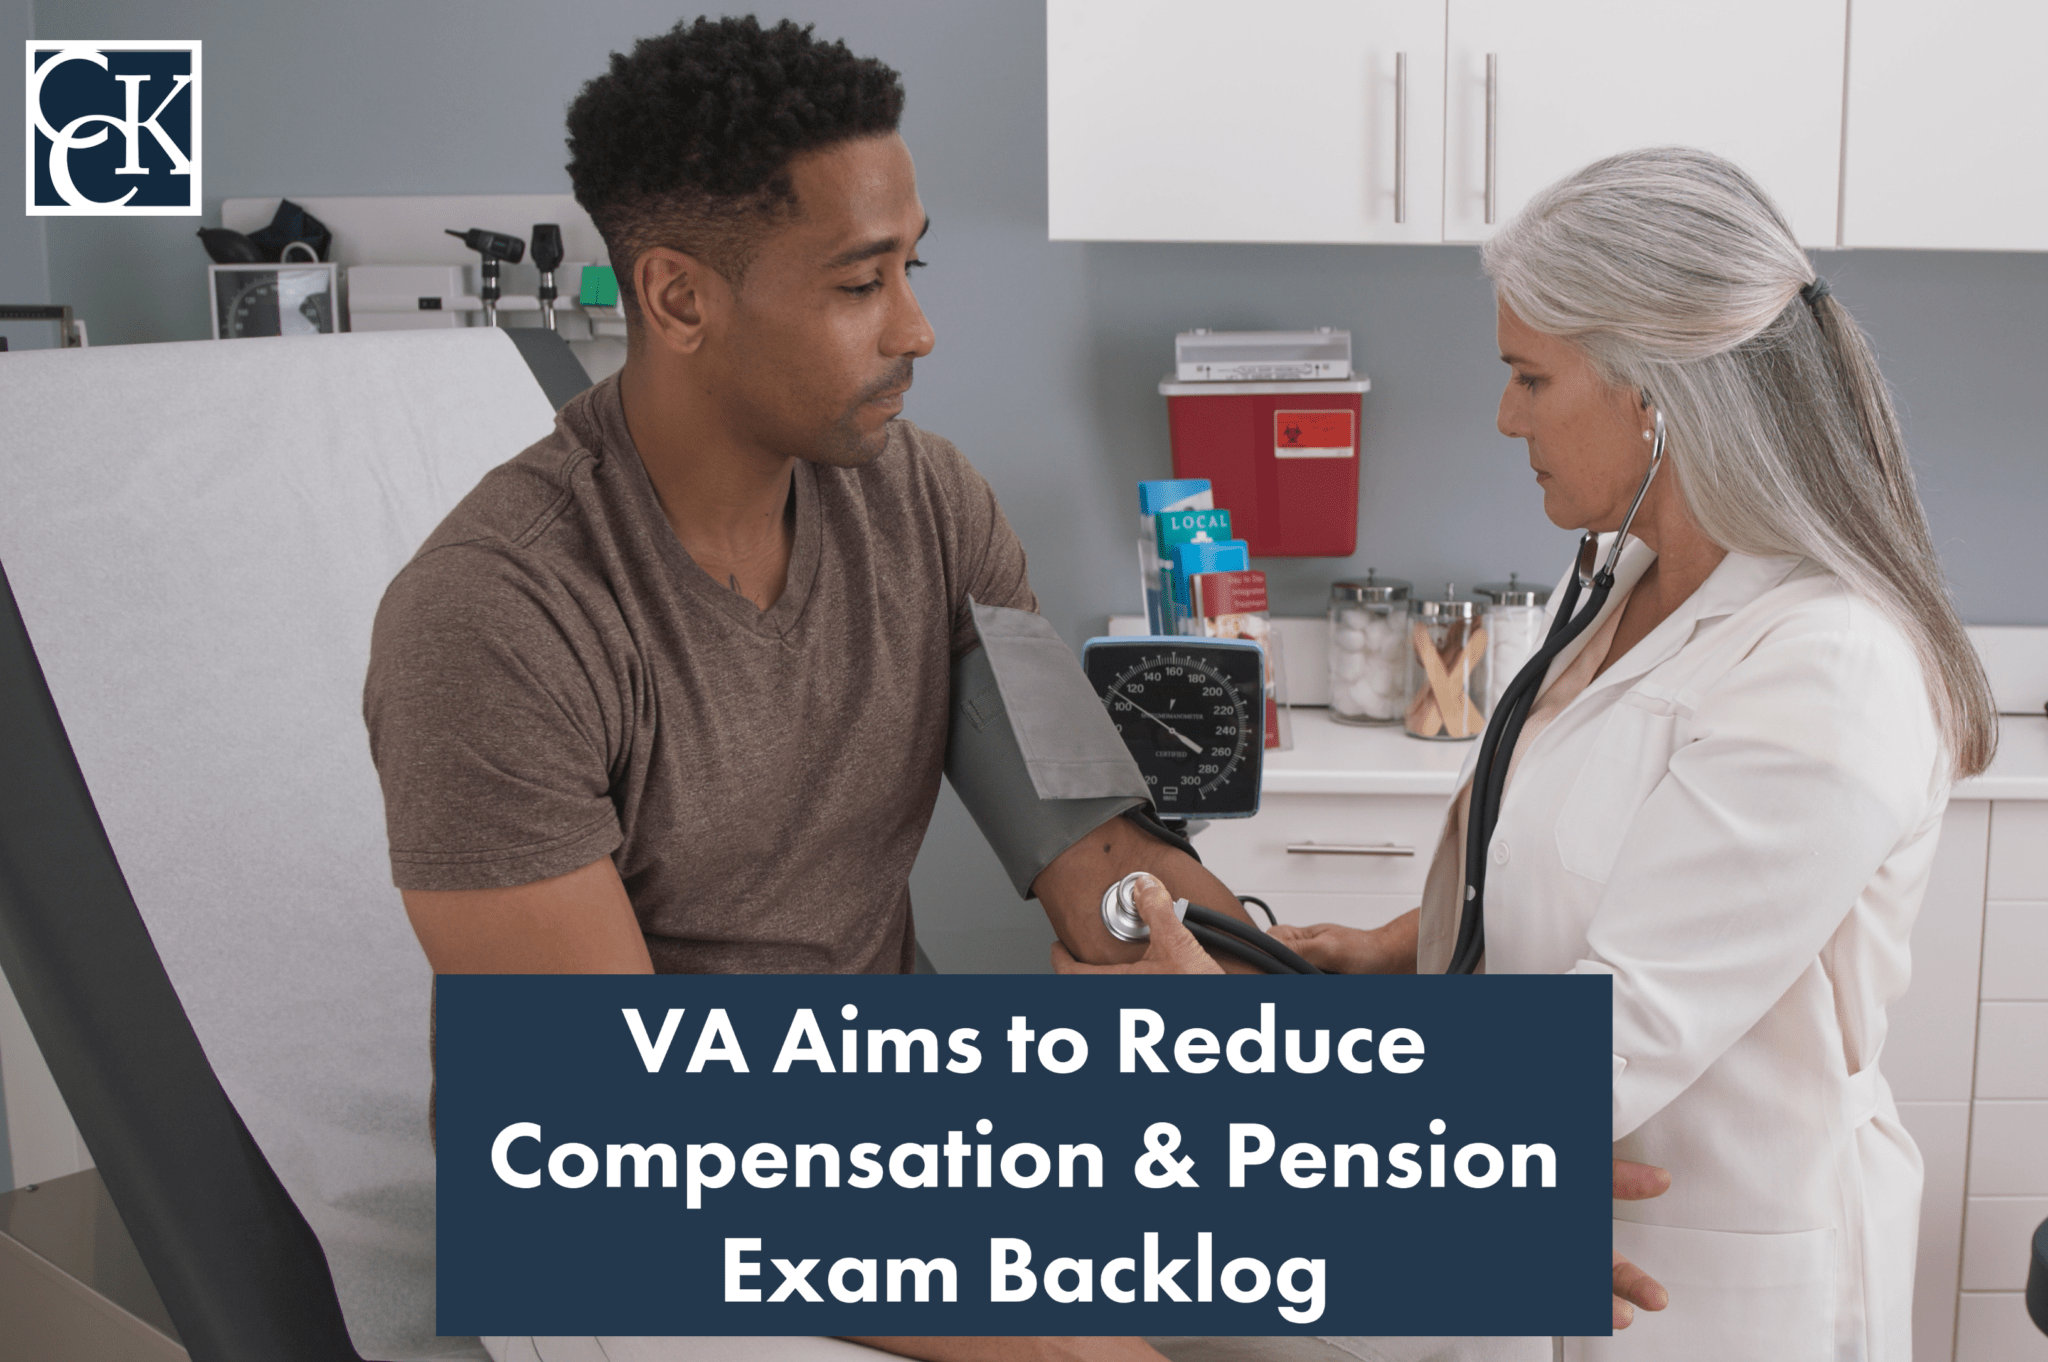 VA Aims to Reduce Compensation & Pension Exam Backlog CCK Law